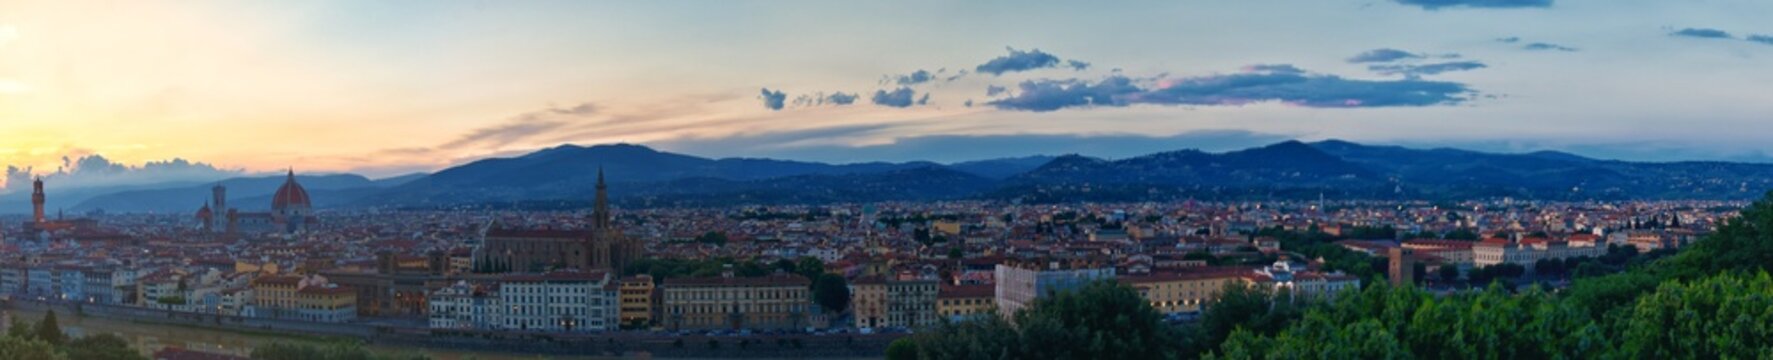 Fototapeta Florence from Piazzale Michelangelo at sunset, capital of Italy’s Tuscany region, Duomo, Ponte Vecchio River Arno Renaissance center for art and architecture, Italy. Europe.